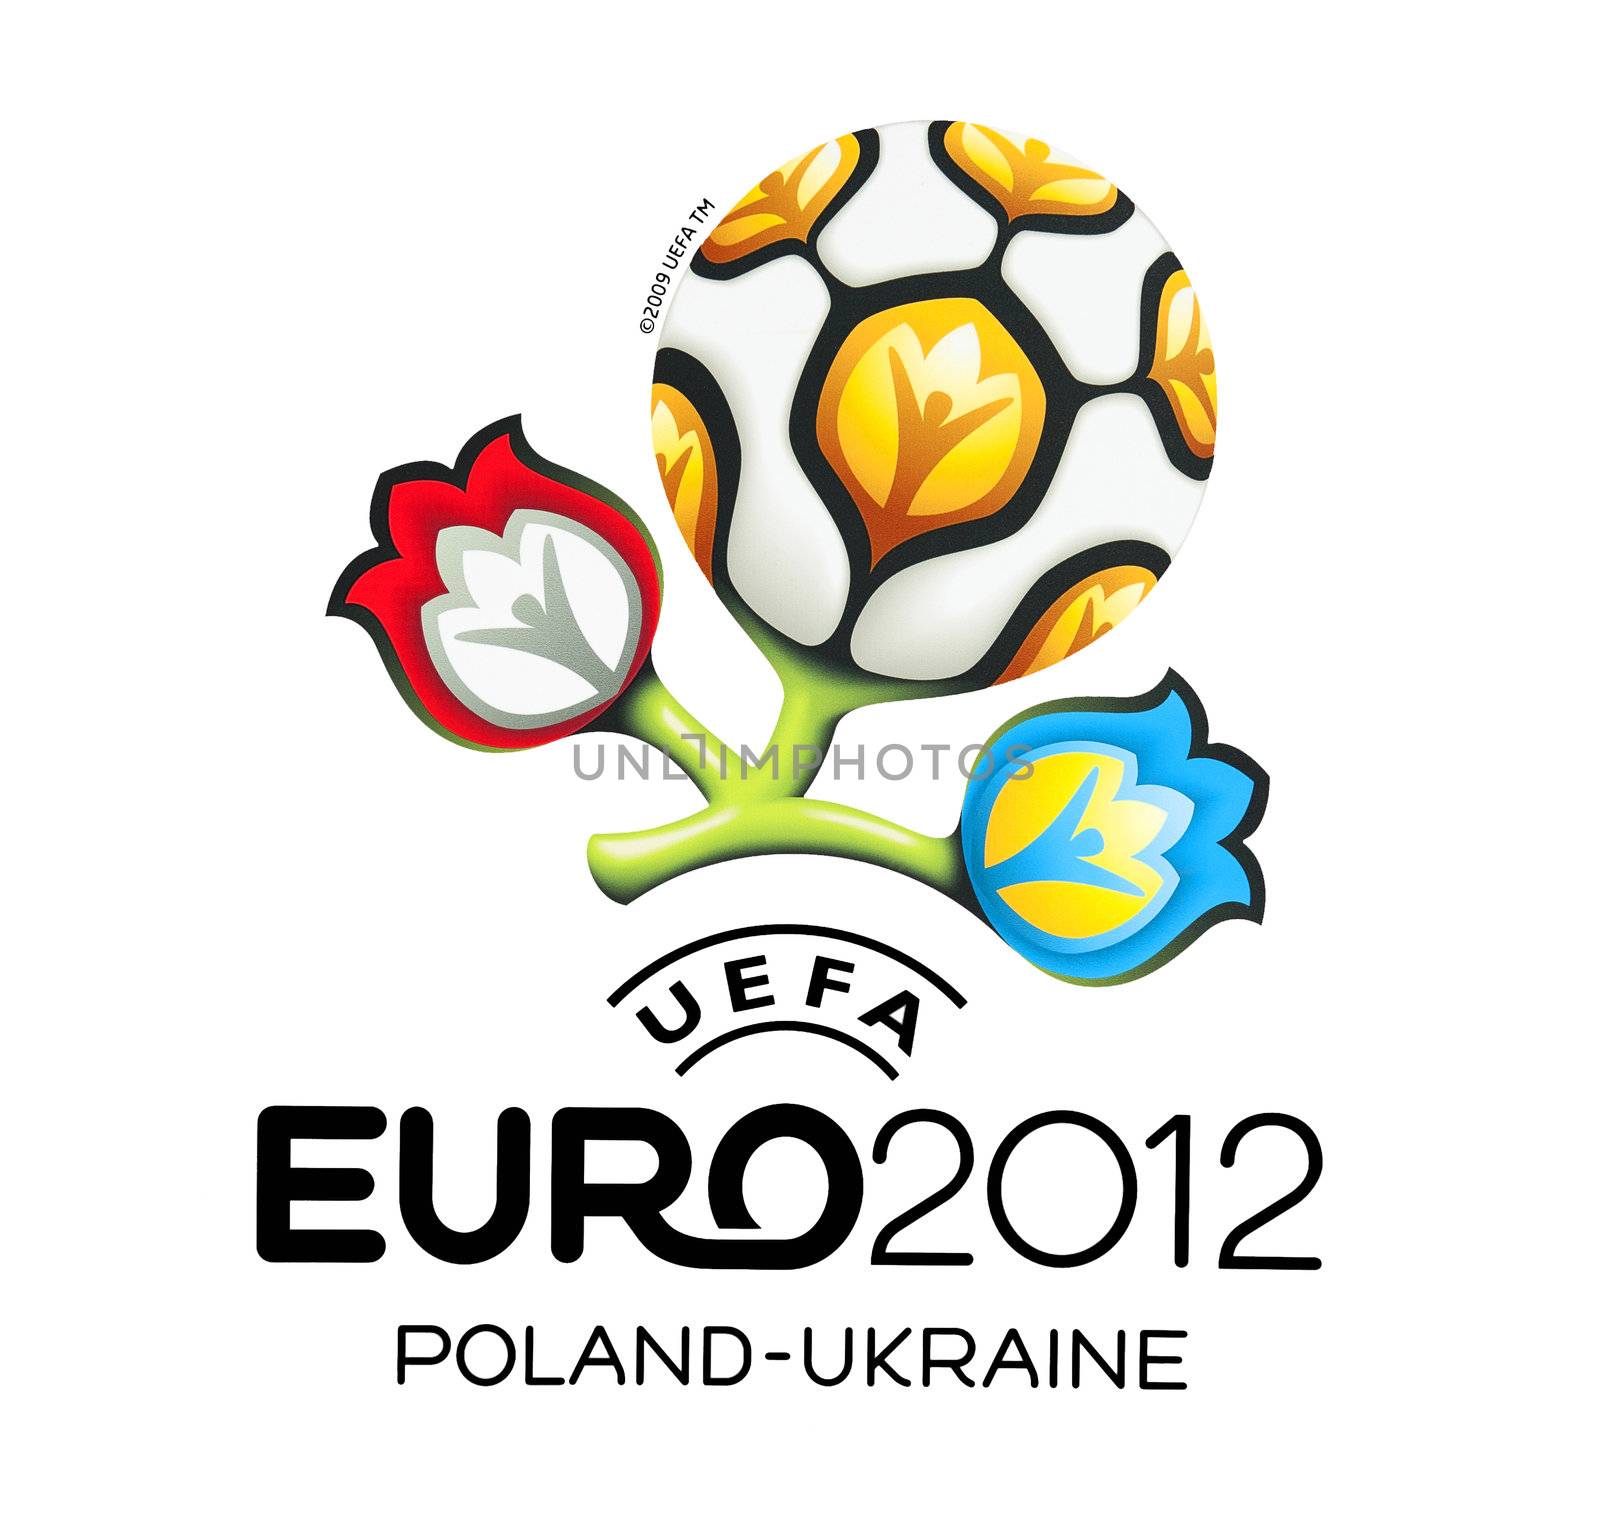 Official logo for UEFA EURO 2012 by Yaurinko